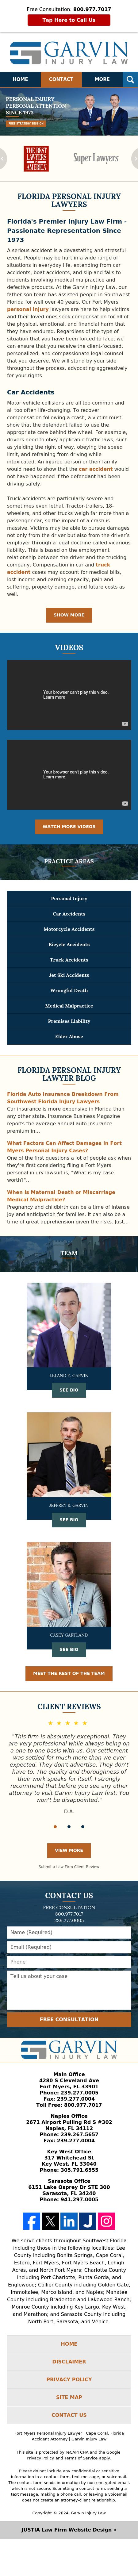 Garvin Law Firm - Naples FL Lawyers